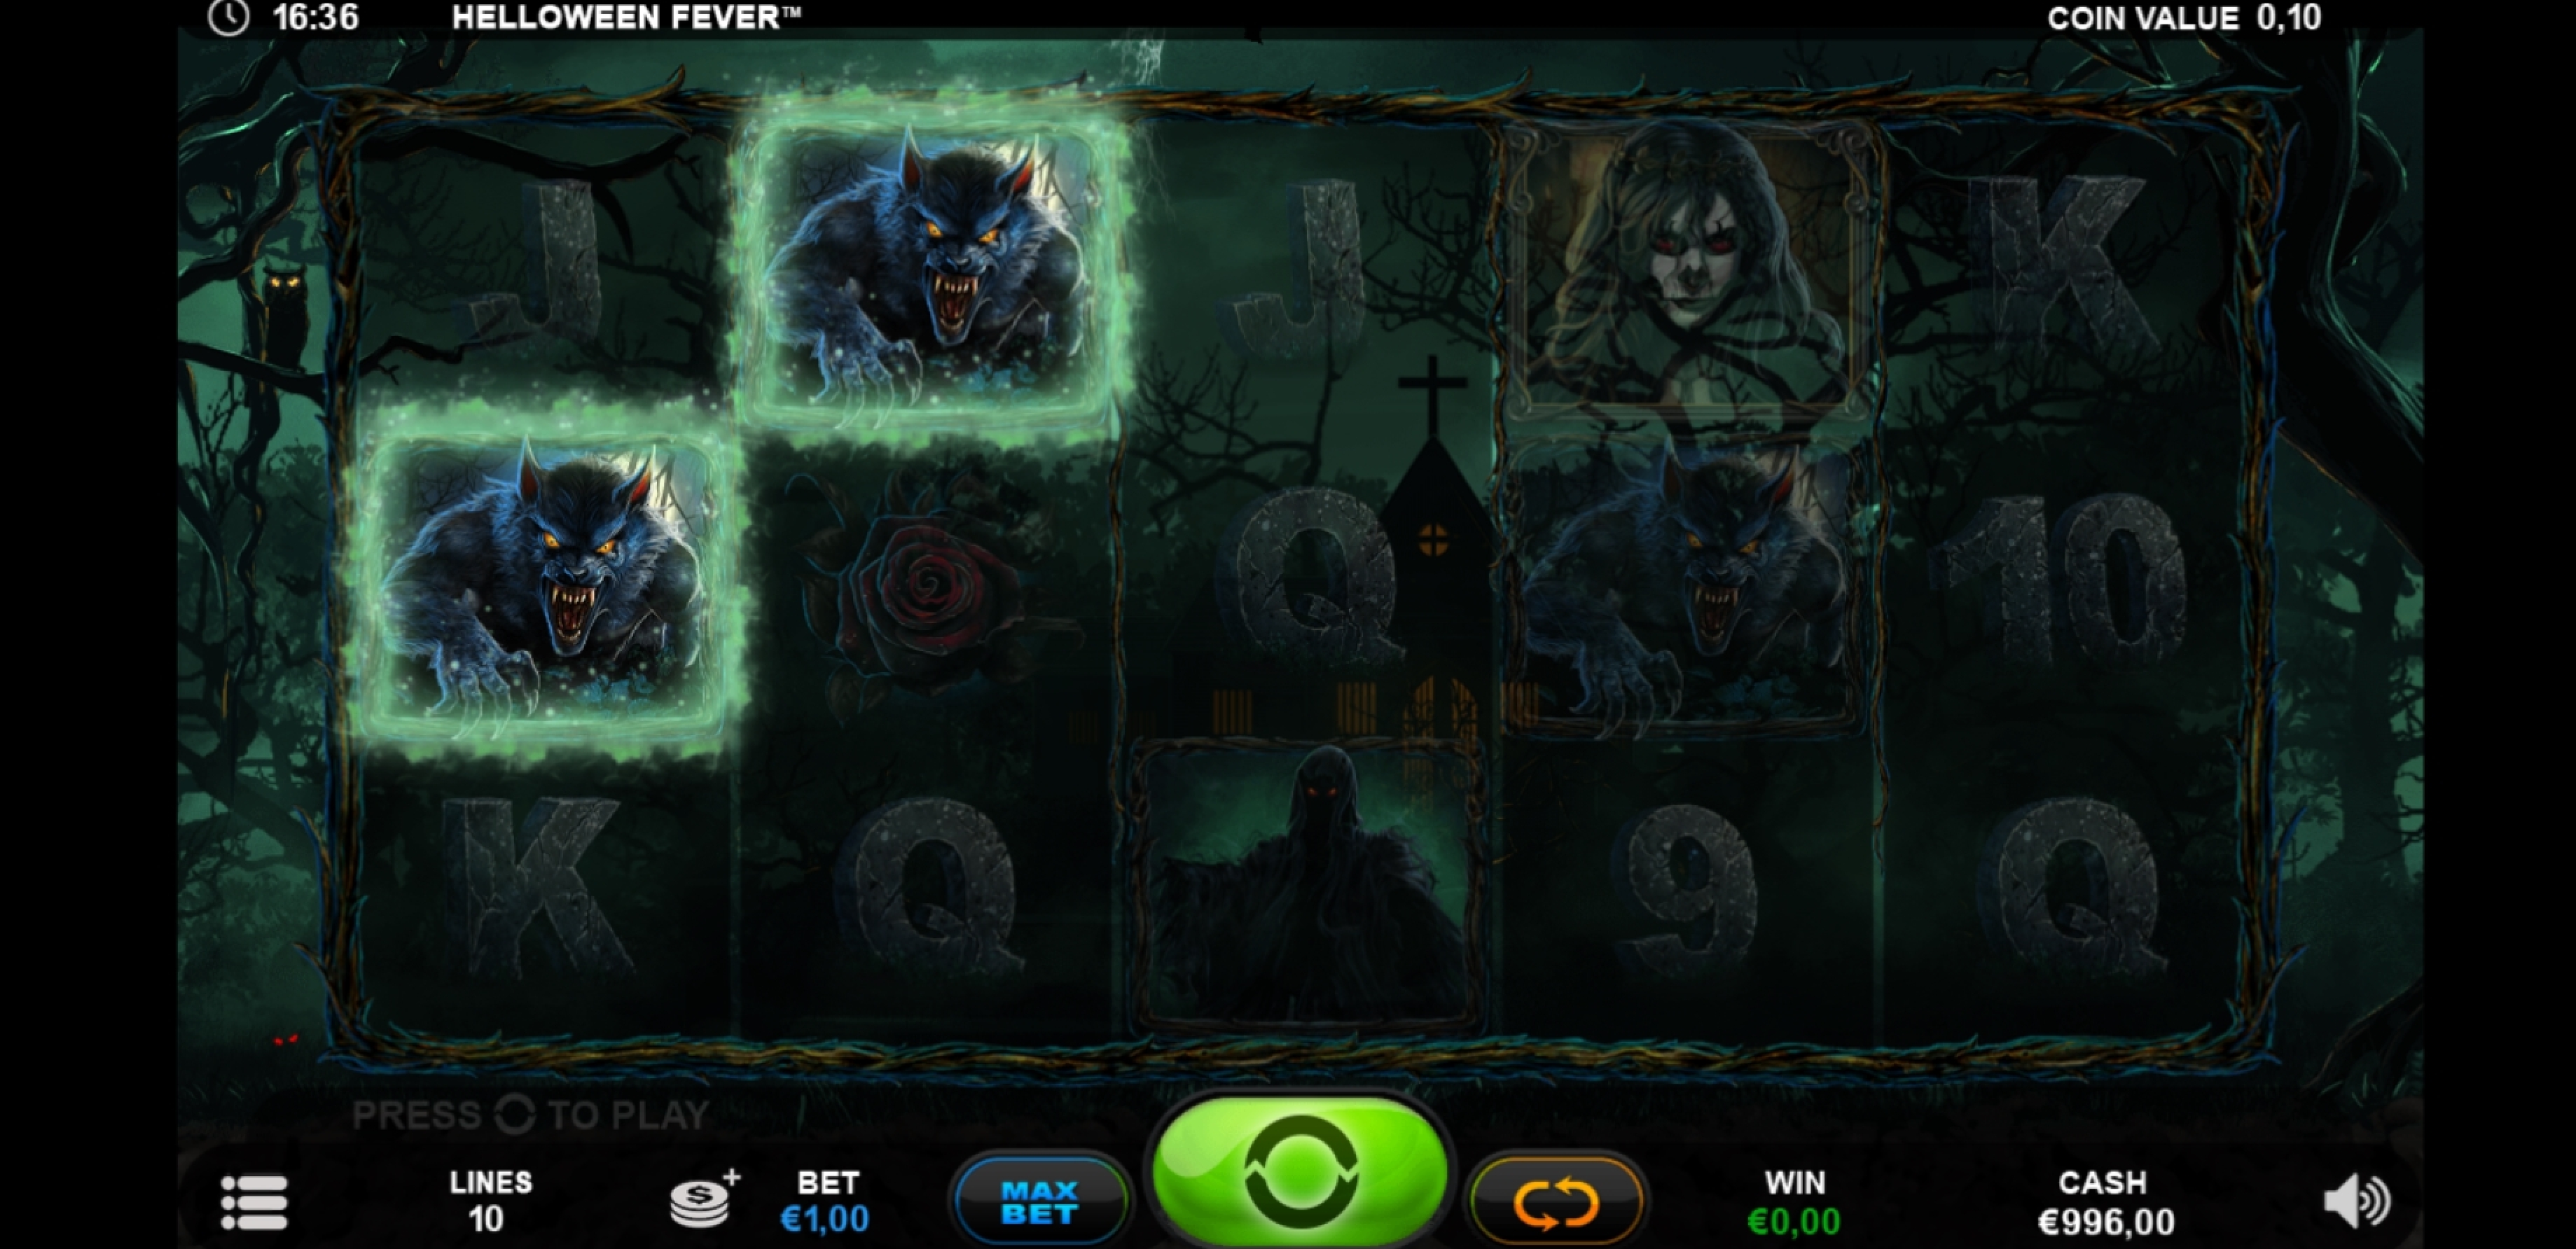 Win Money in Helloween Fever Free Slot Game by Plank Gaming